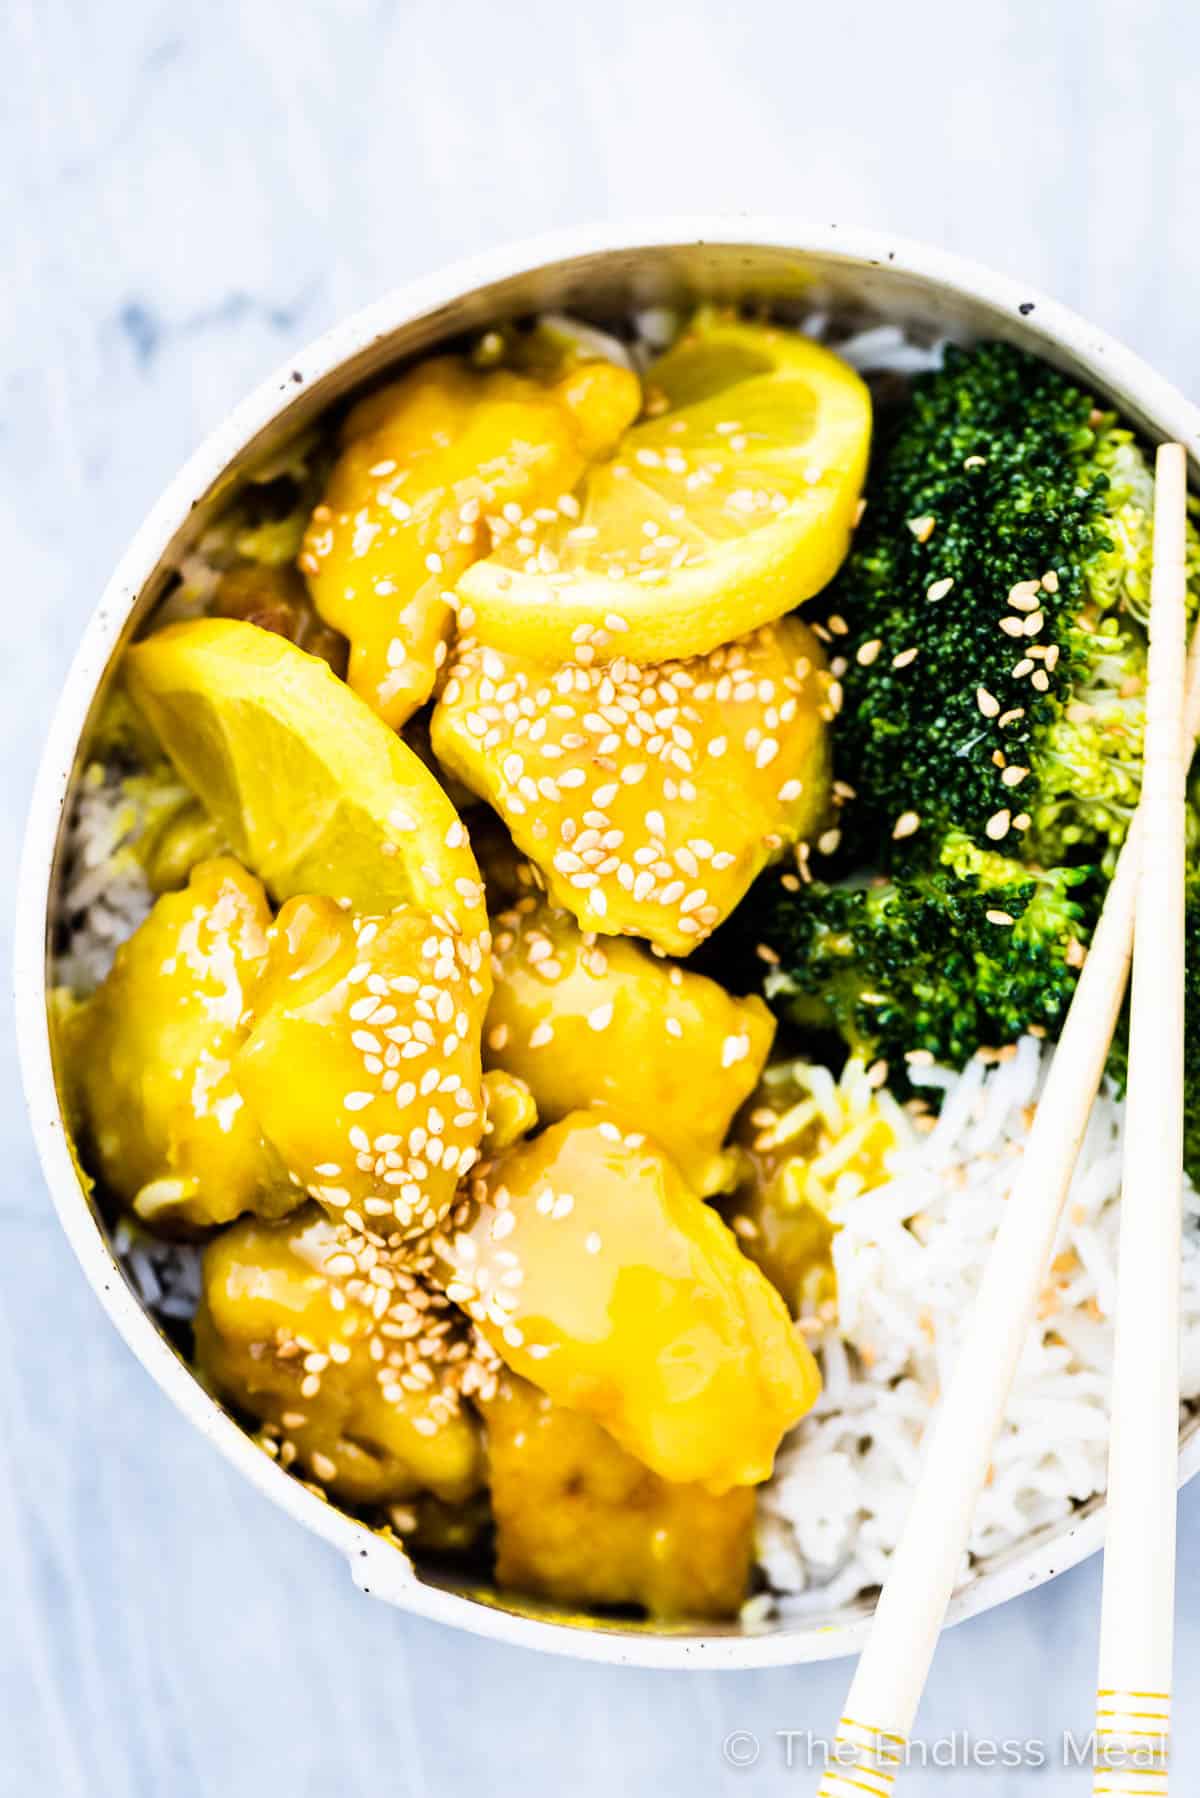 Lemon chicken bites in a bowl with rice and broccoli.